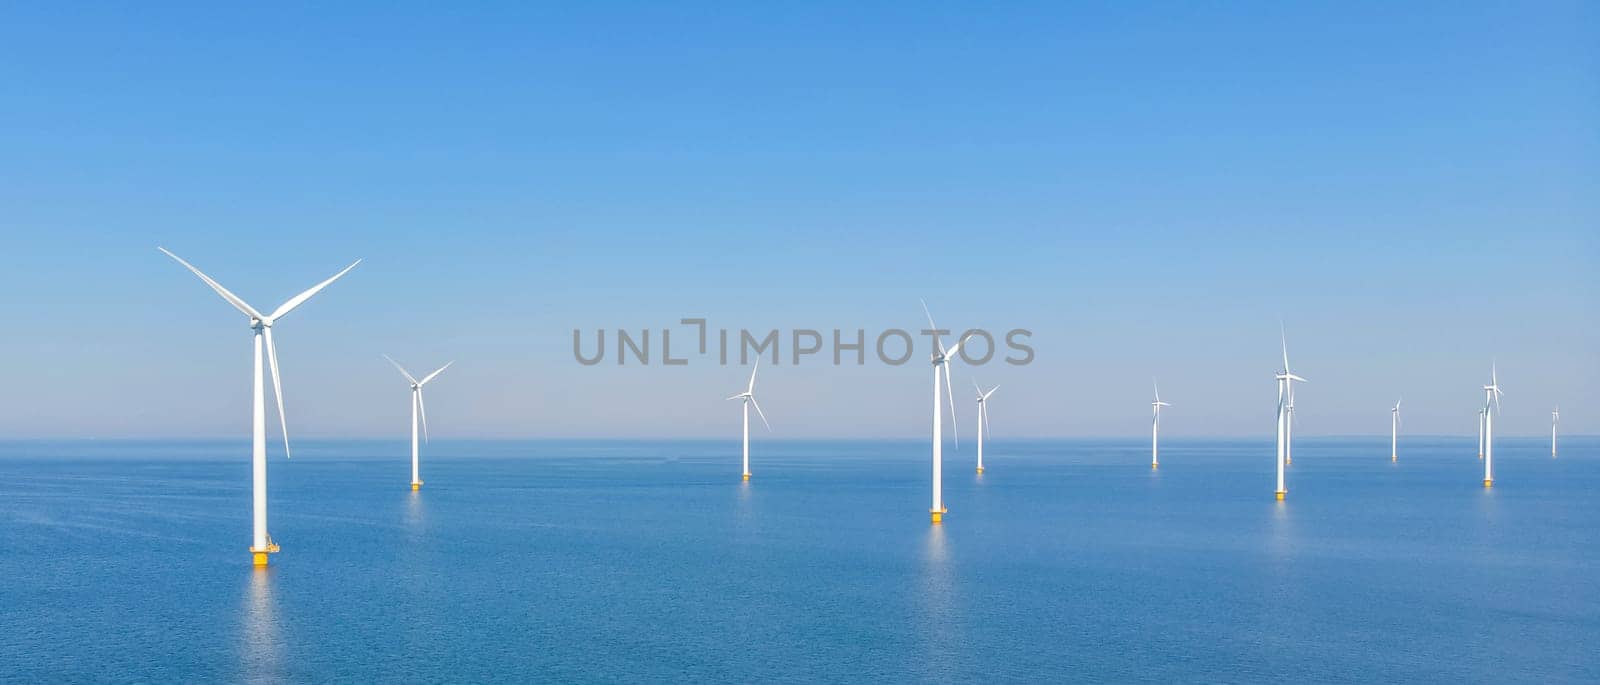 Wind turbines off the coast create electricity in the azure sea by fokkebok